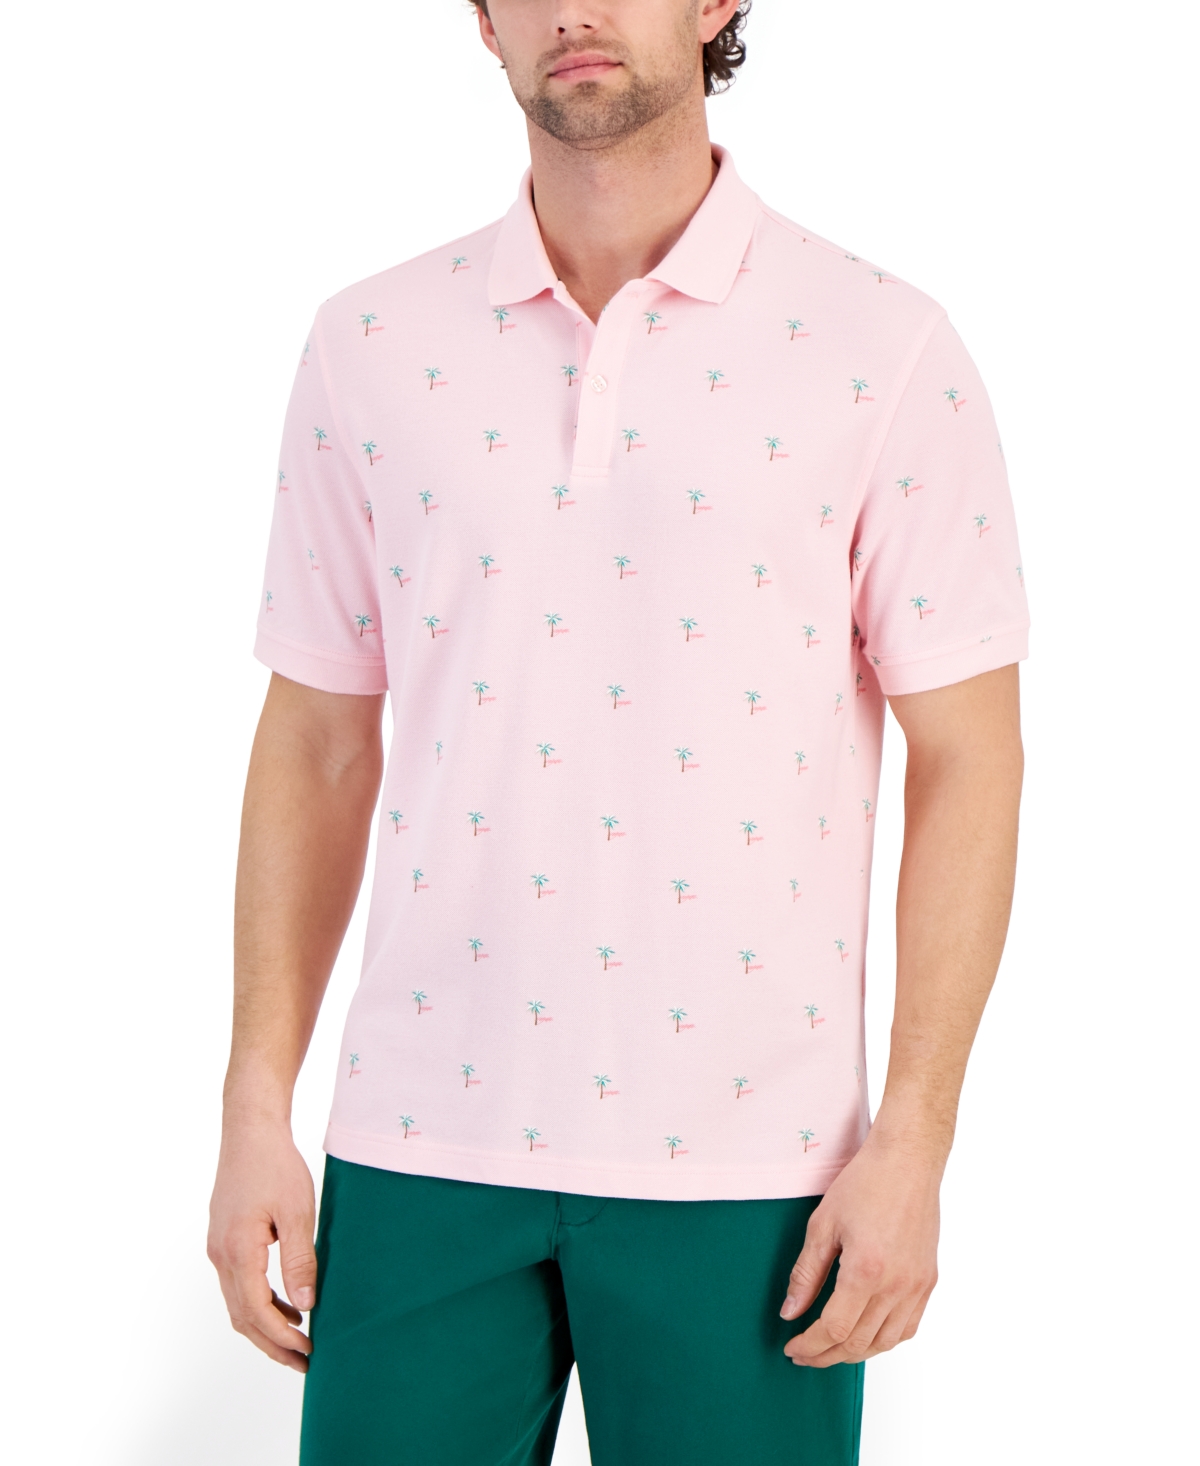 Men's Palm Tree Graphic Pique Polo Shirt, Created for Macy's - Rose Shadow